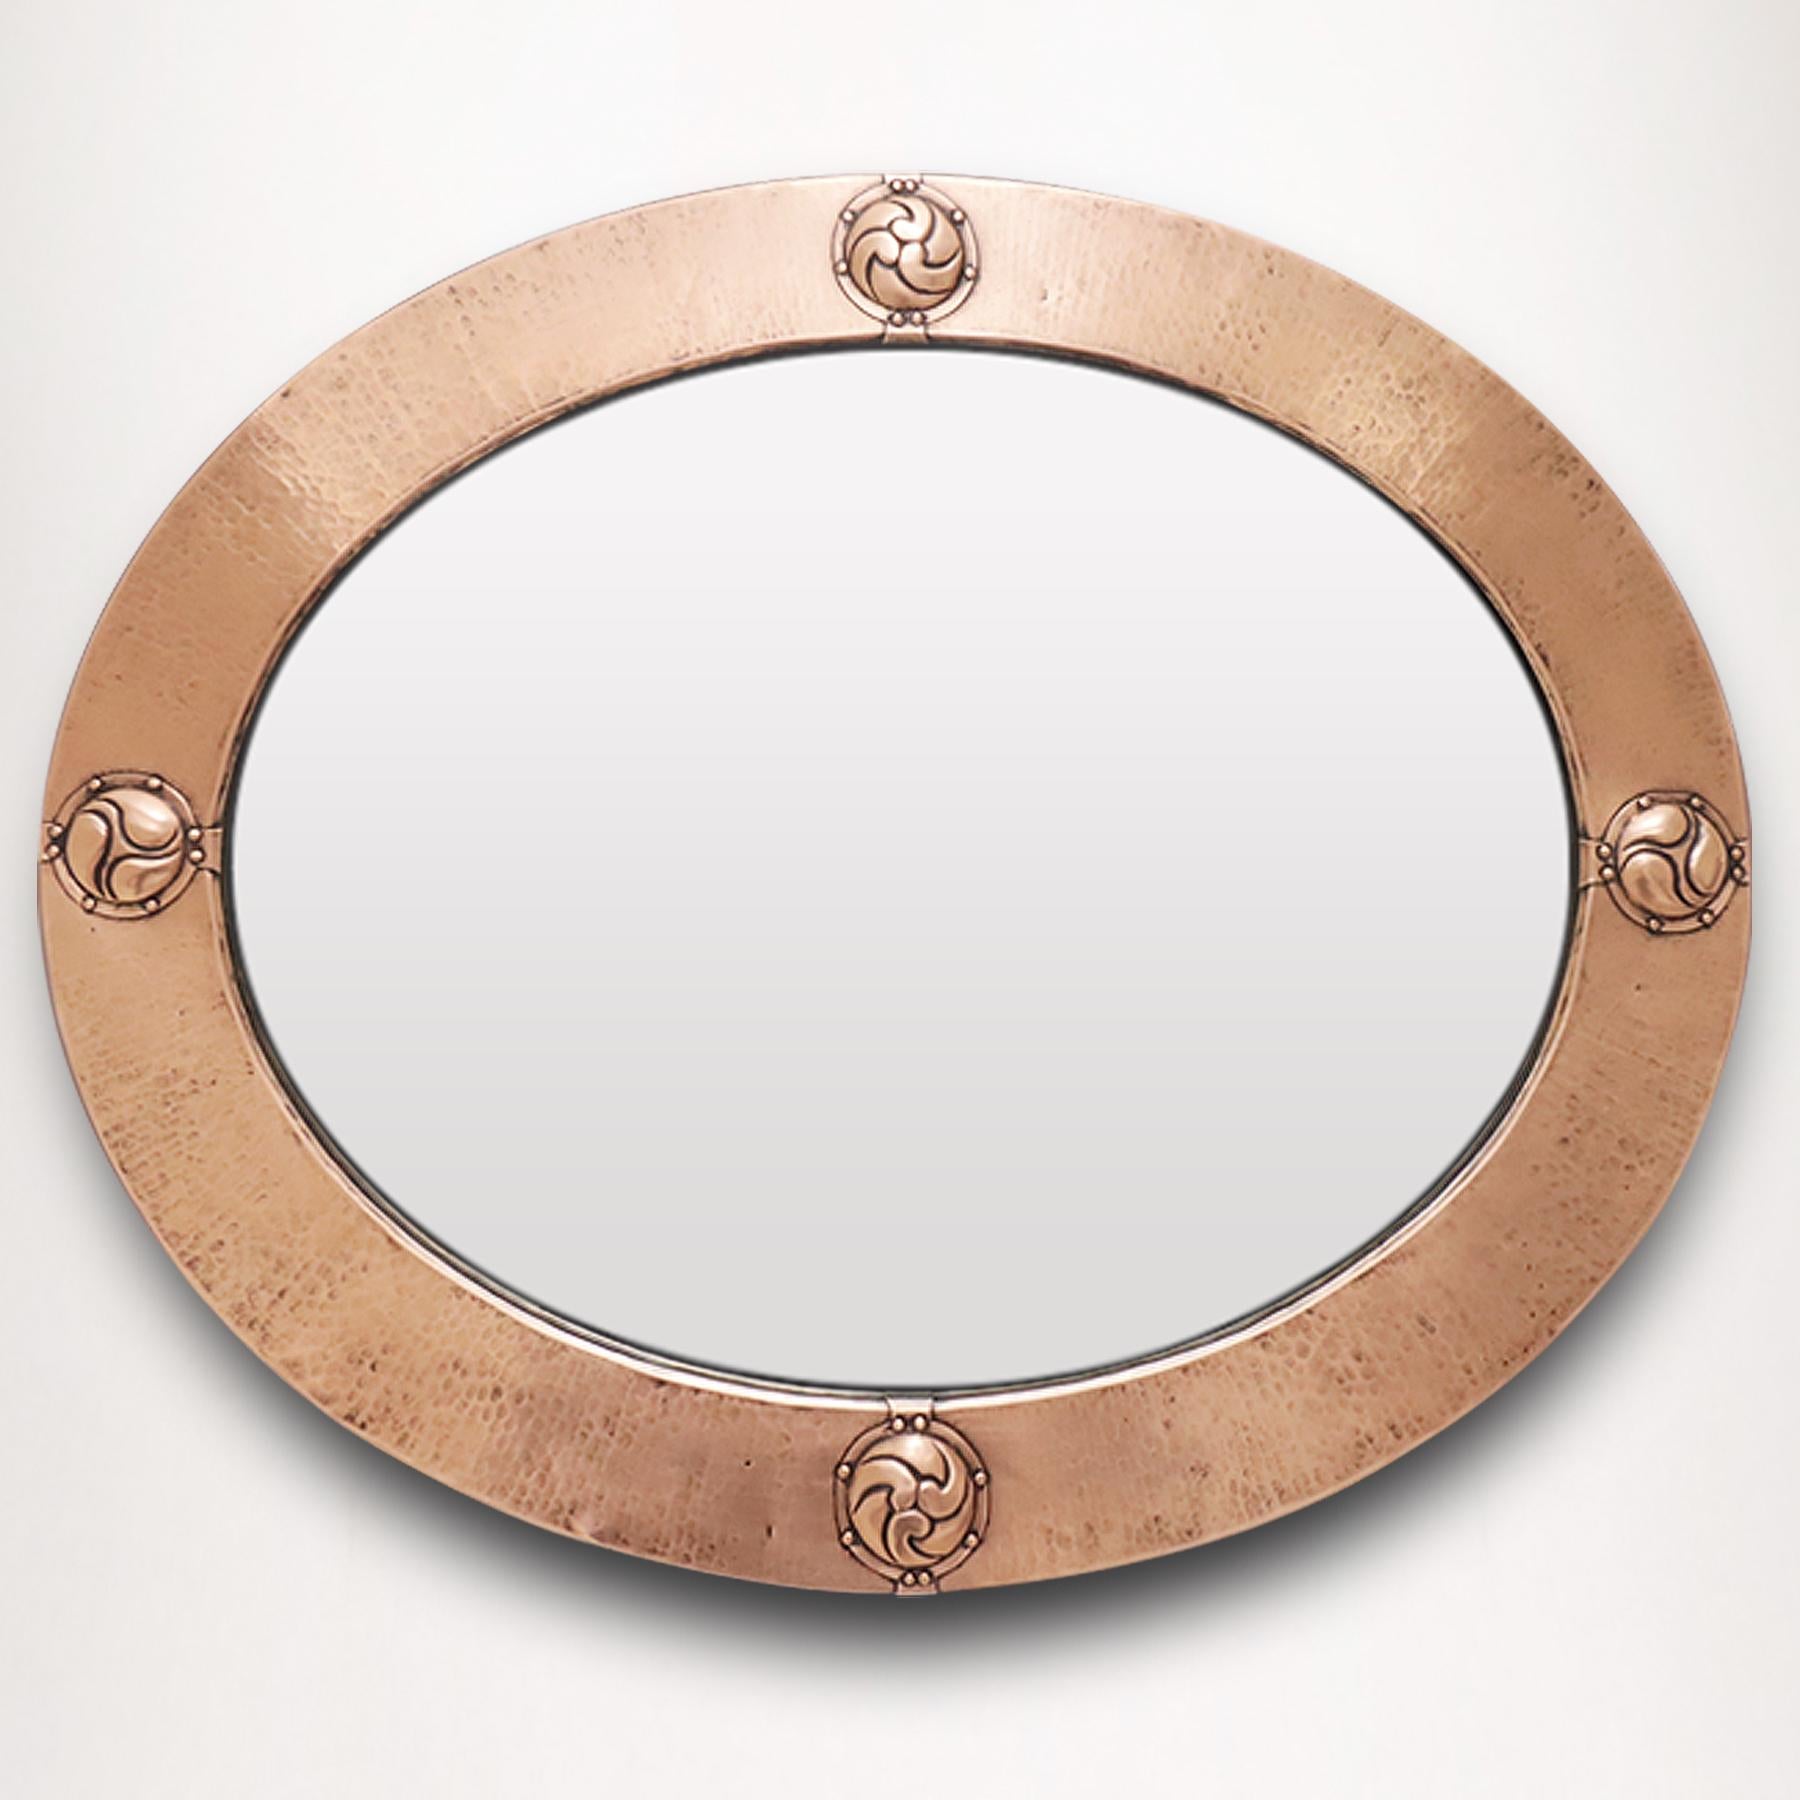 A superb and finely crafted original 1895 English Arts and Crafts period hammered copper oval mirror believed to be designed by Archibald Knox for Liberty & Co; the hammered copper bezel frame featuring copper cabochons depicting Celtic symbols of